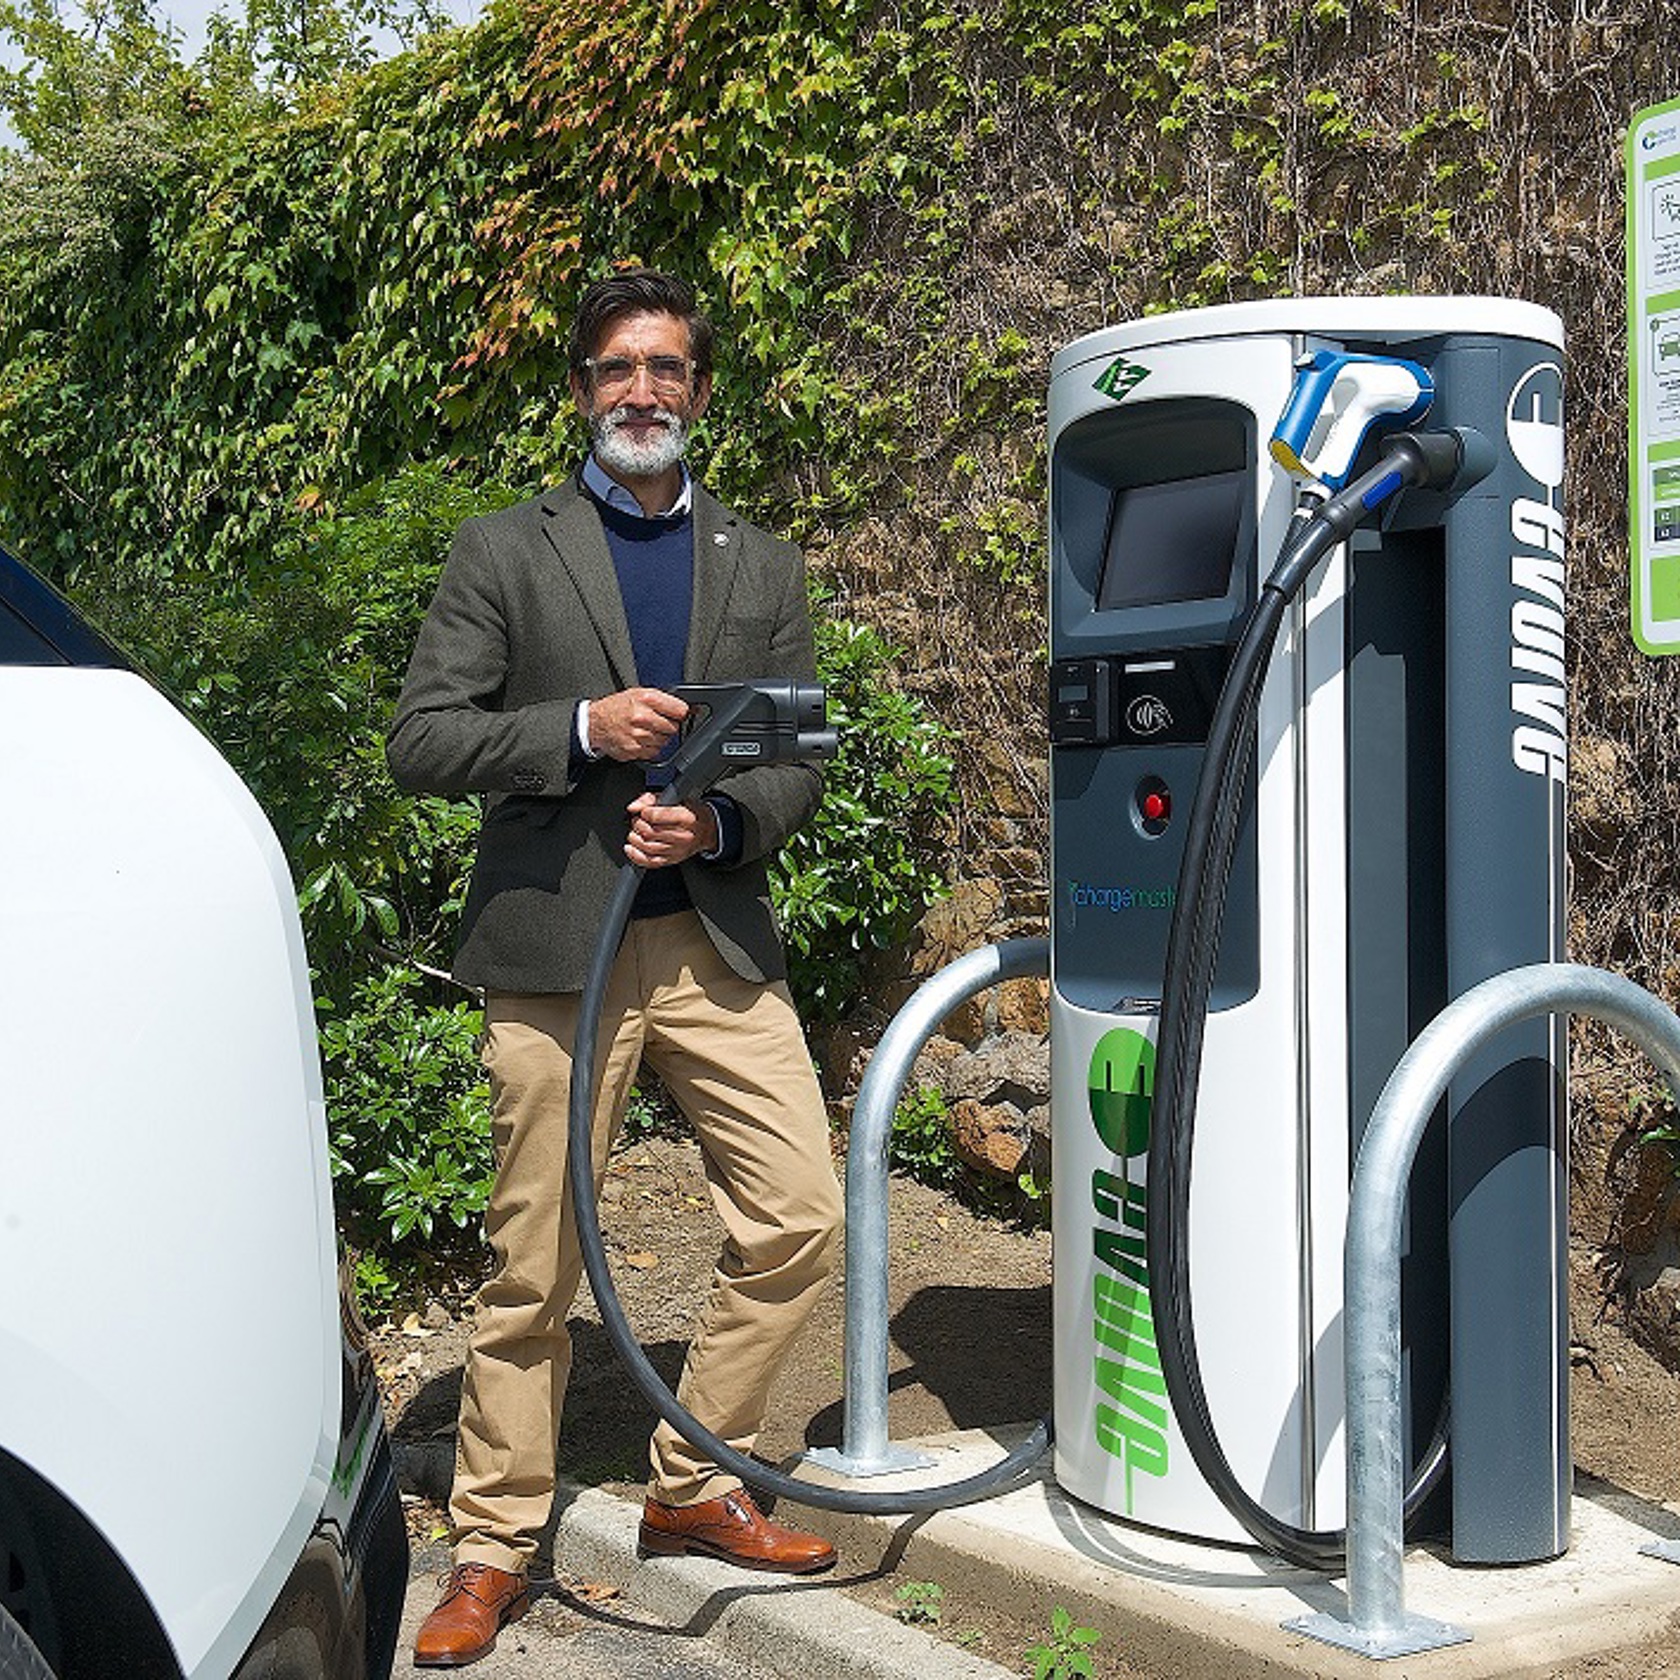 Andrew Welsby demonstrates the rapid electric vehicle charger at Red Houses.